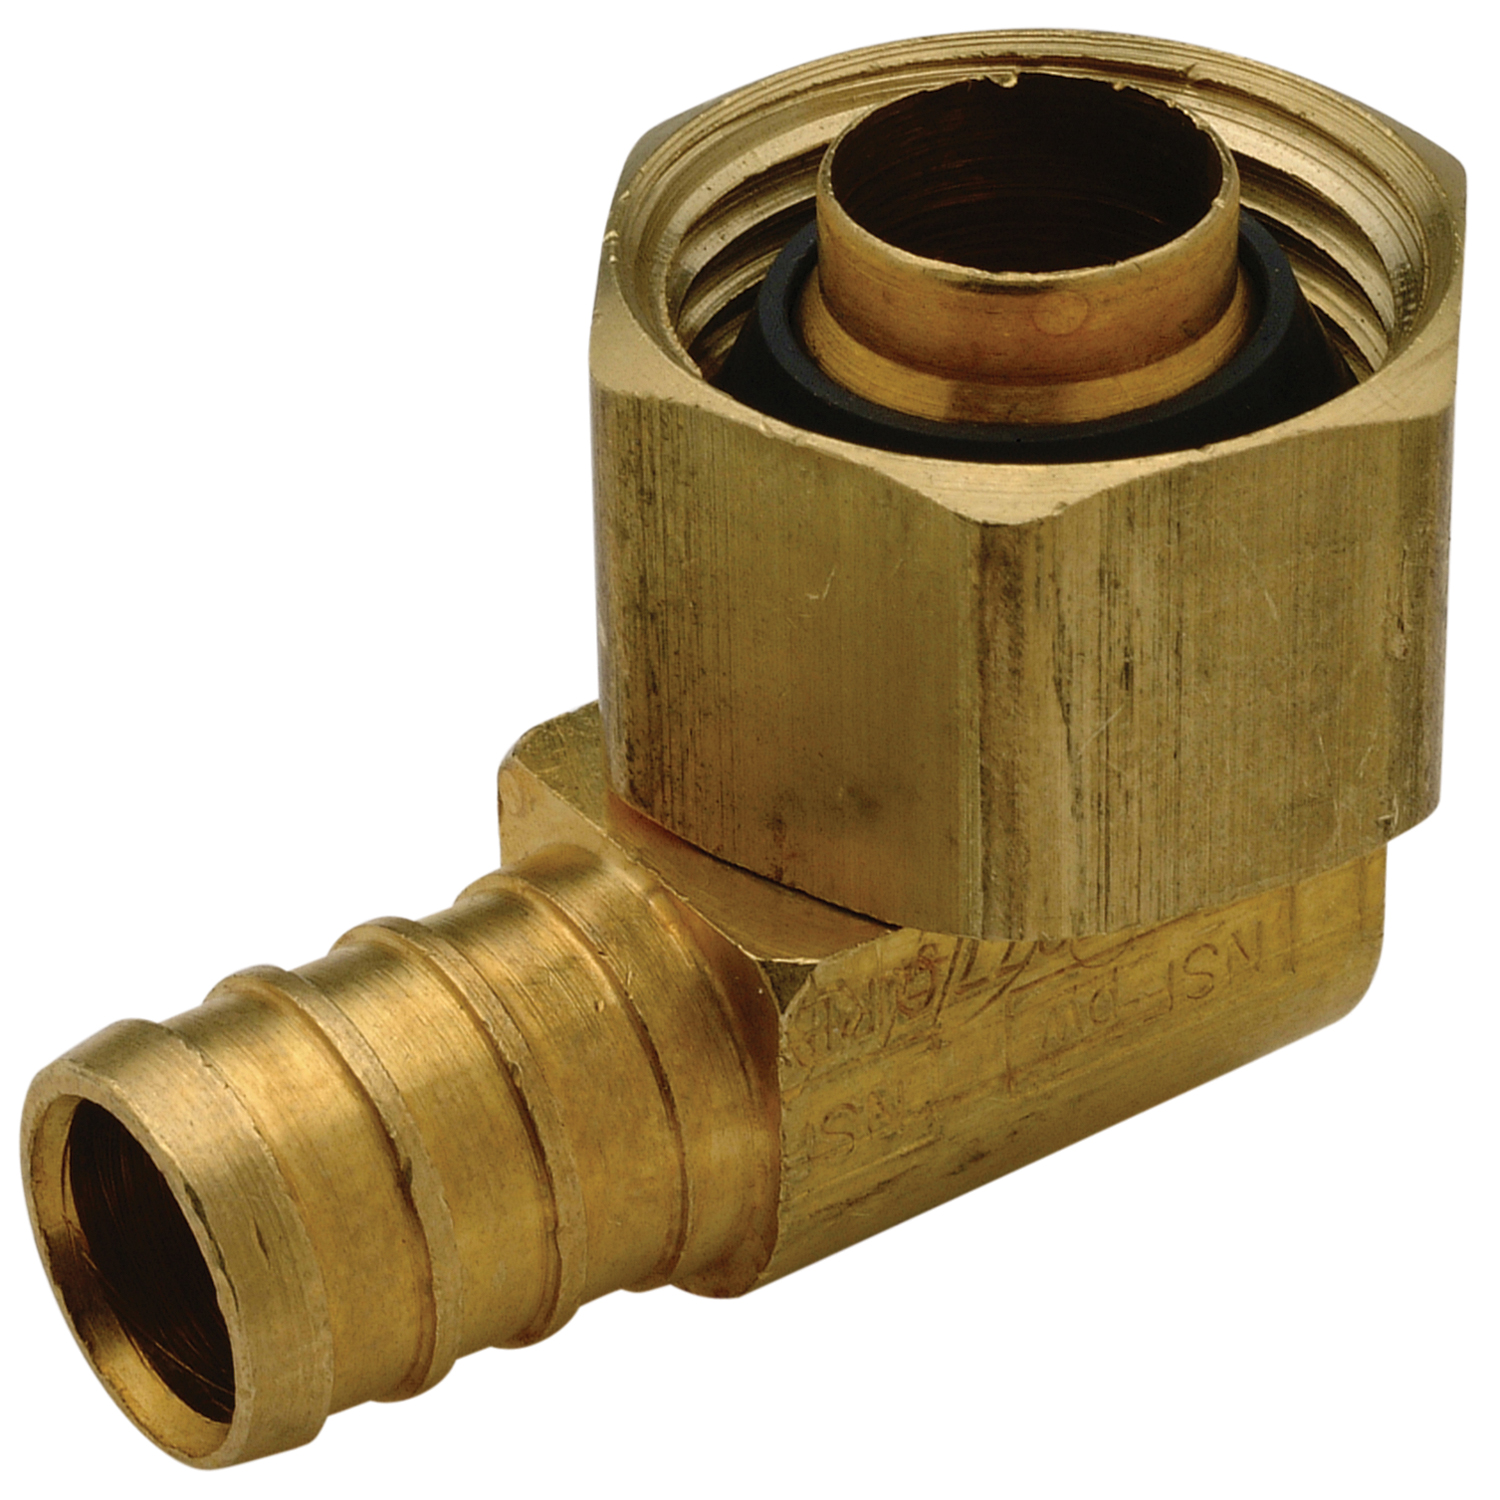 XIZONLIN Brass Compression Elbow 90 Degree Equal Diameter 18mm Water Pipe  Fittings Connector, Pipe Fittings -  Canada